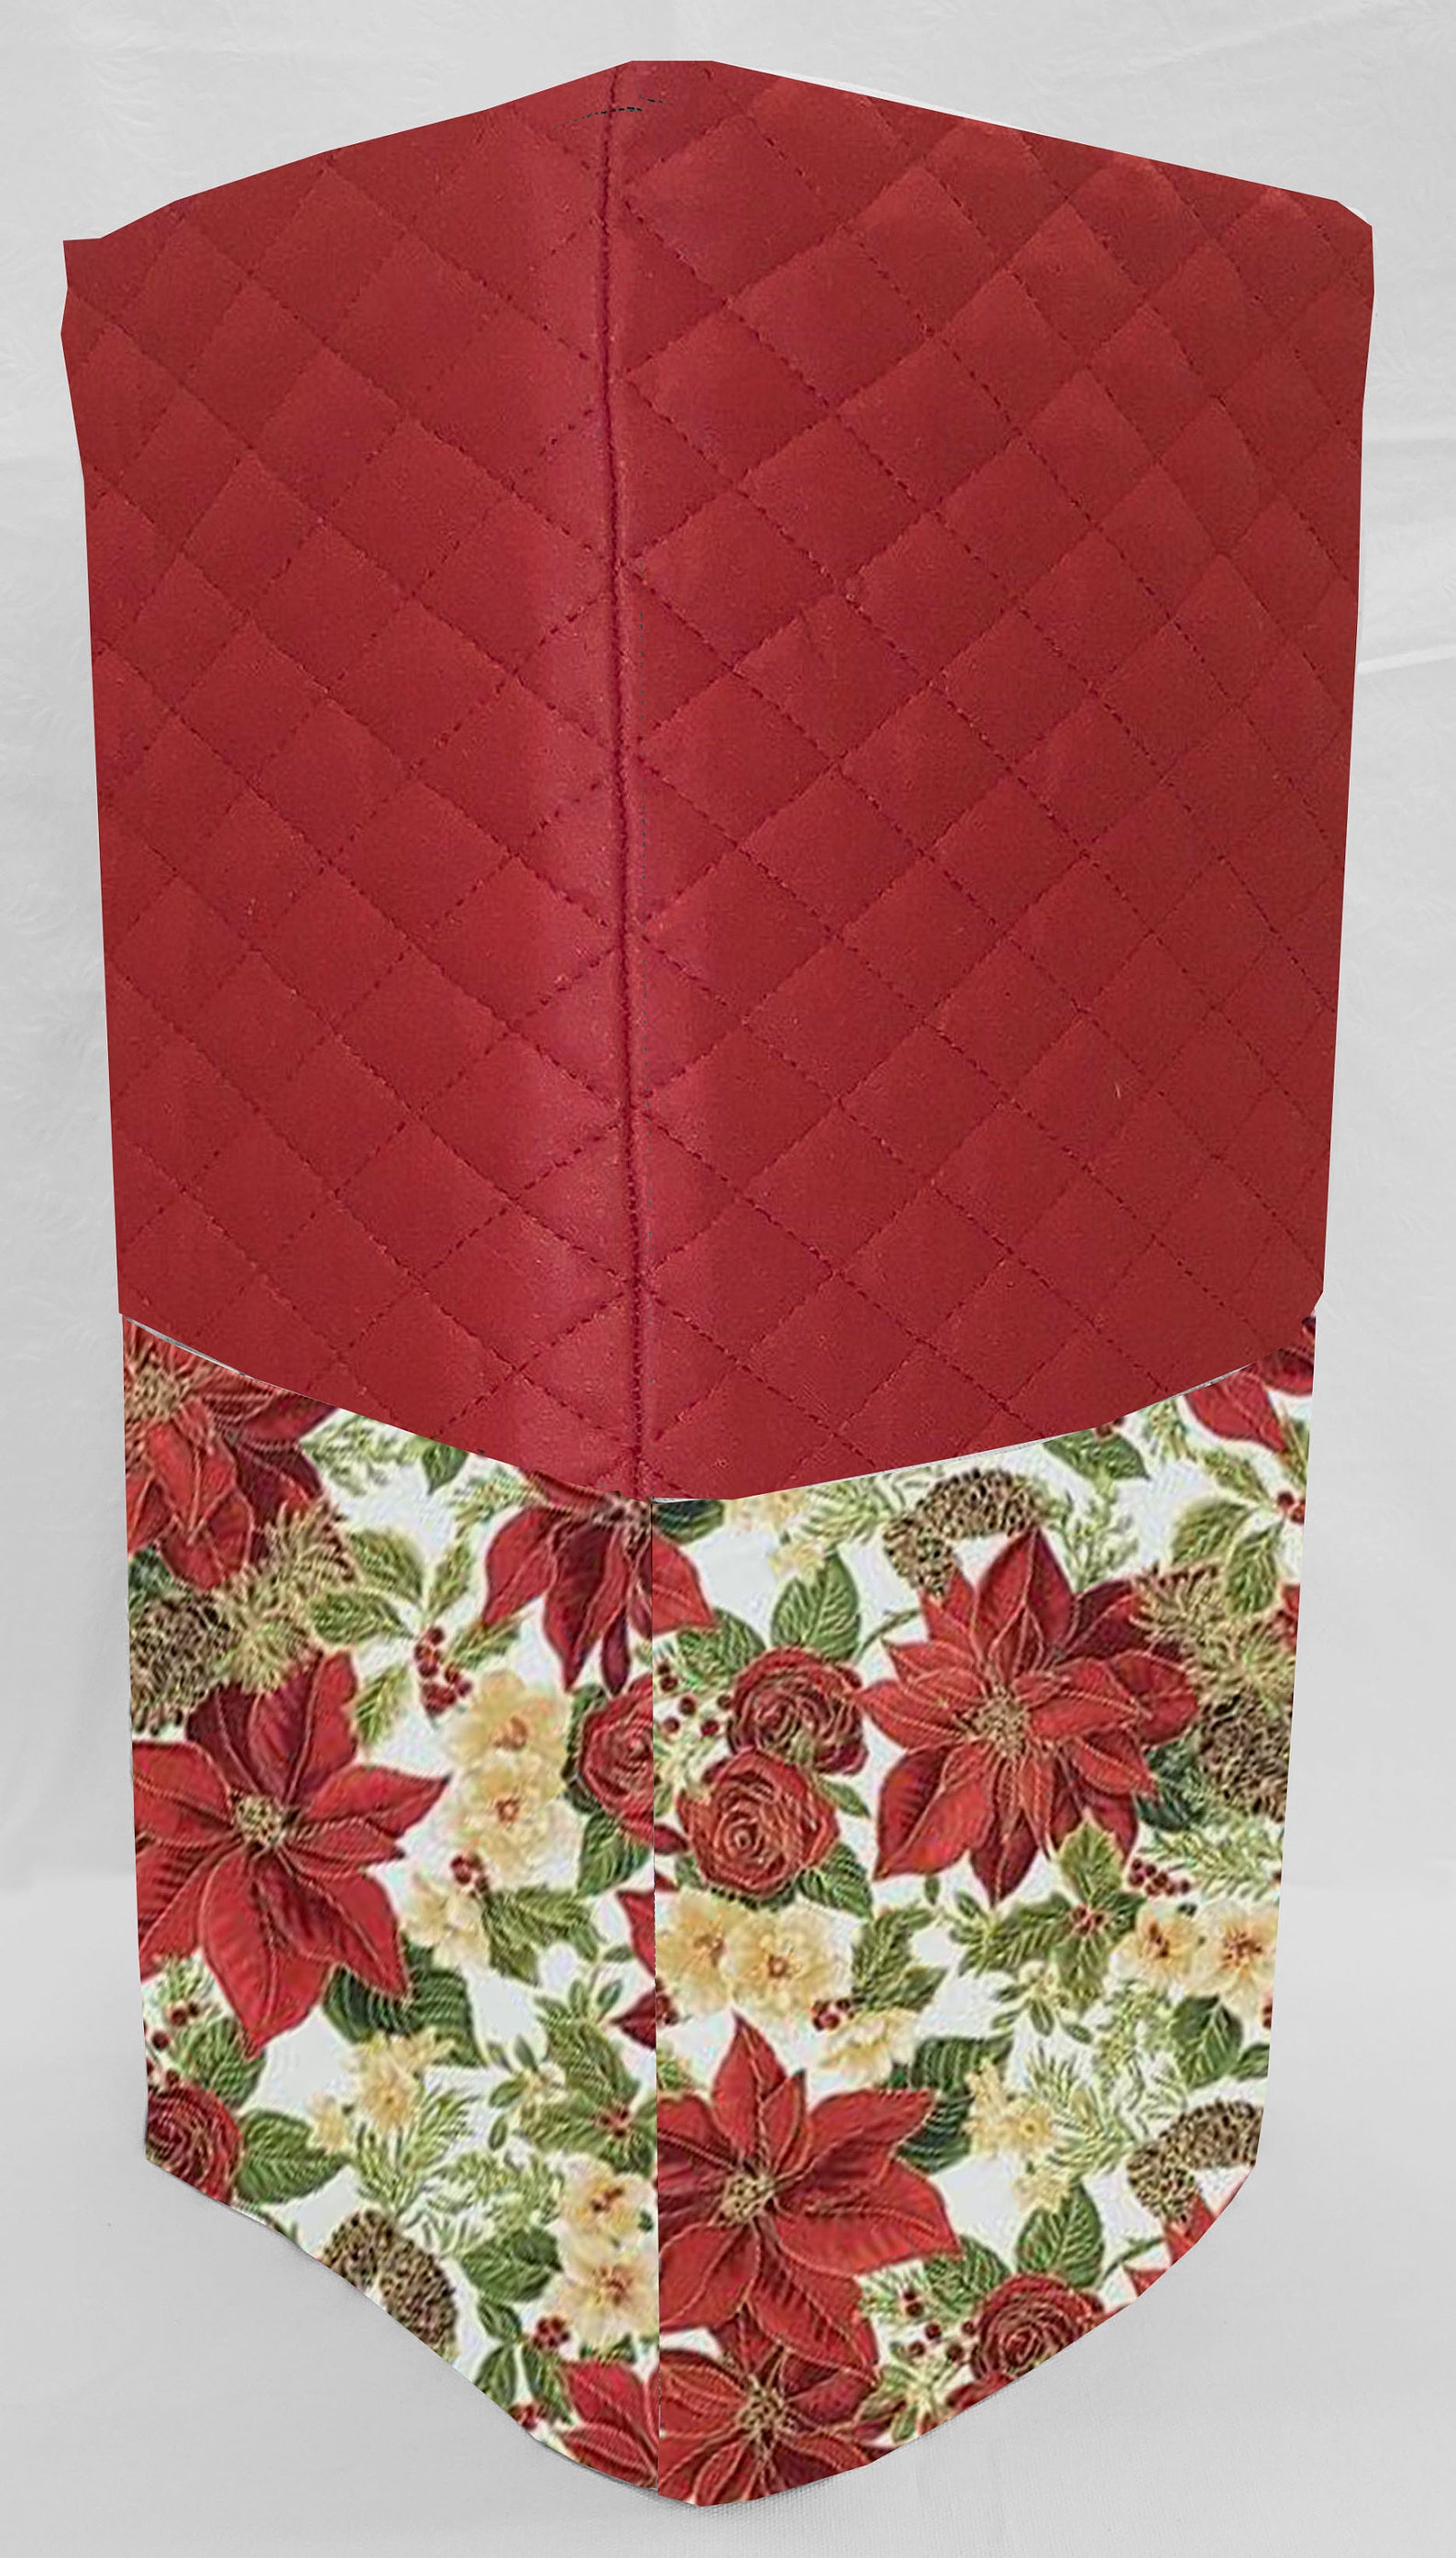 Quilted Christmas Poinsettia Blender Cover by Penny's Needful Things (Small, Red) - image 1 of 1